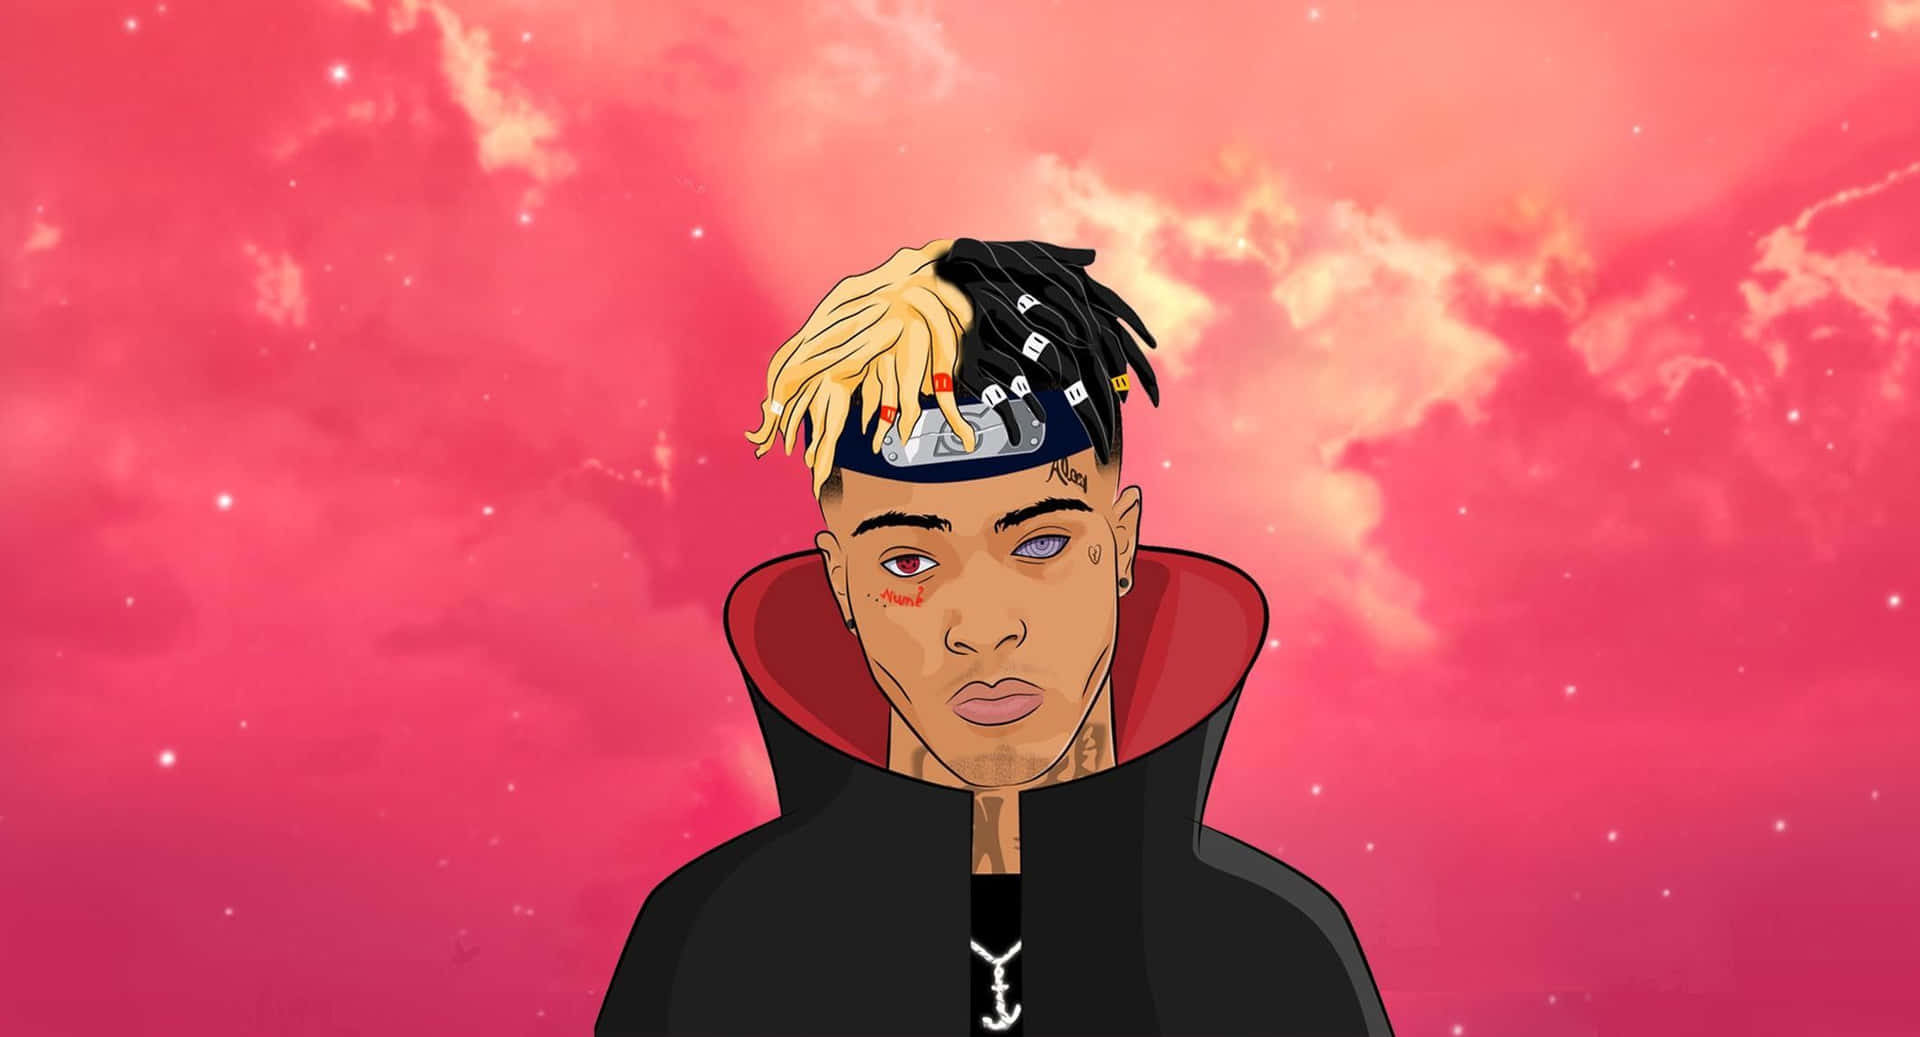 XXXTENTACION workimg hard on producing new tracks with his laptop. Wallpaper